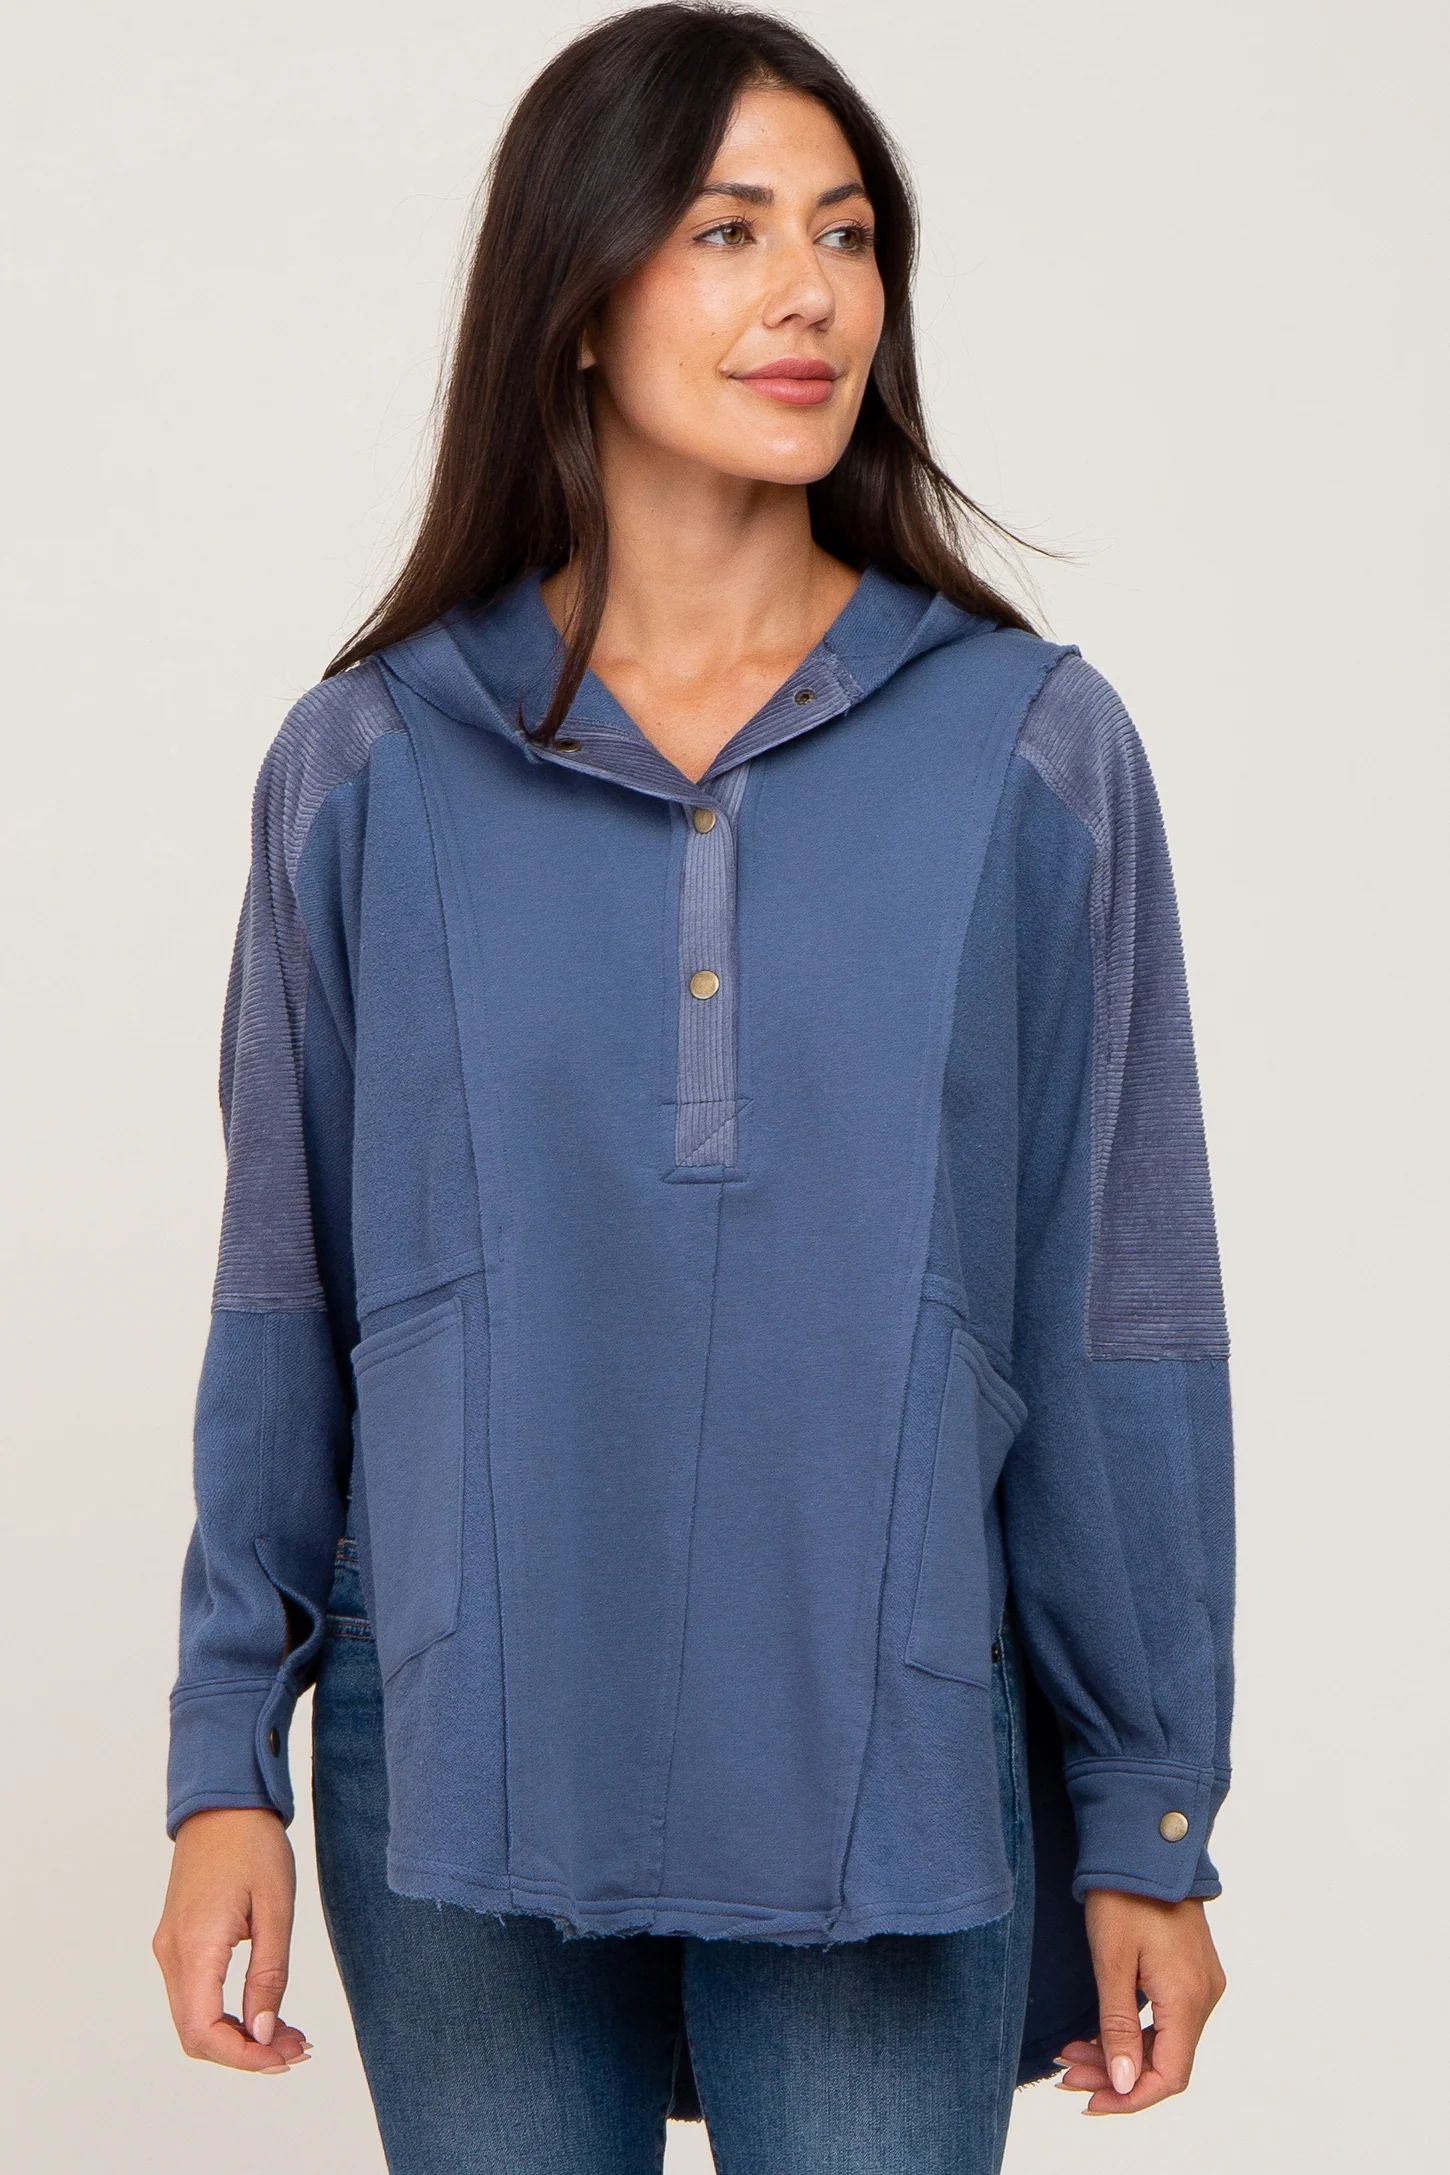 Blue Soft Mixed Knit Button Front Hooded Top | PinkBlush Maternity